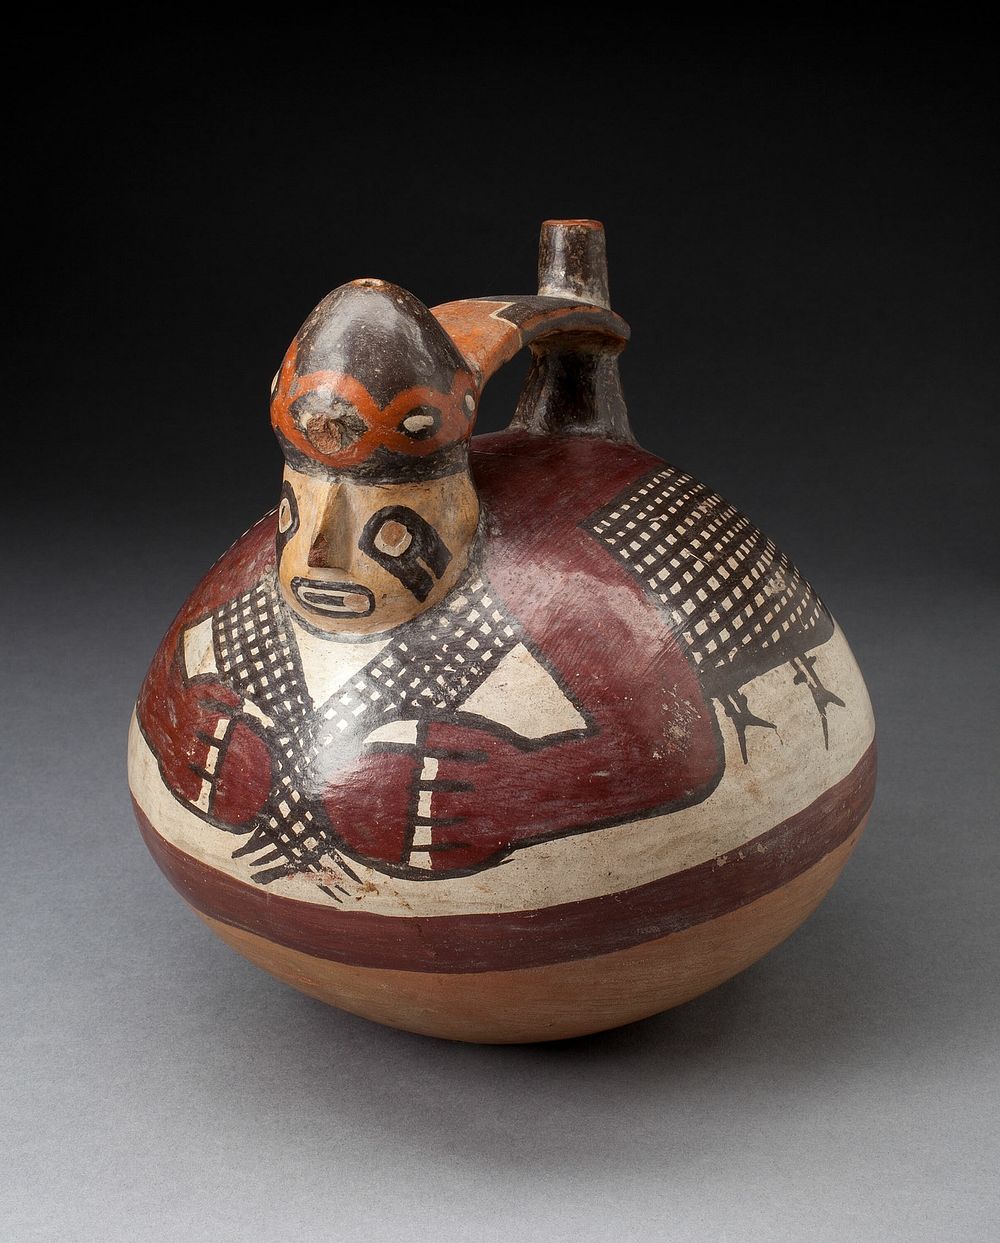 Single Spout Vessel in the Form of a Figure Holding a Fishing Net by Nazca